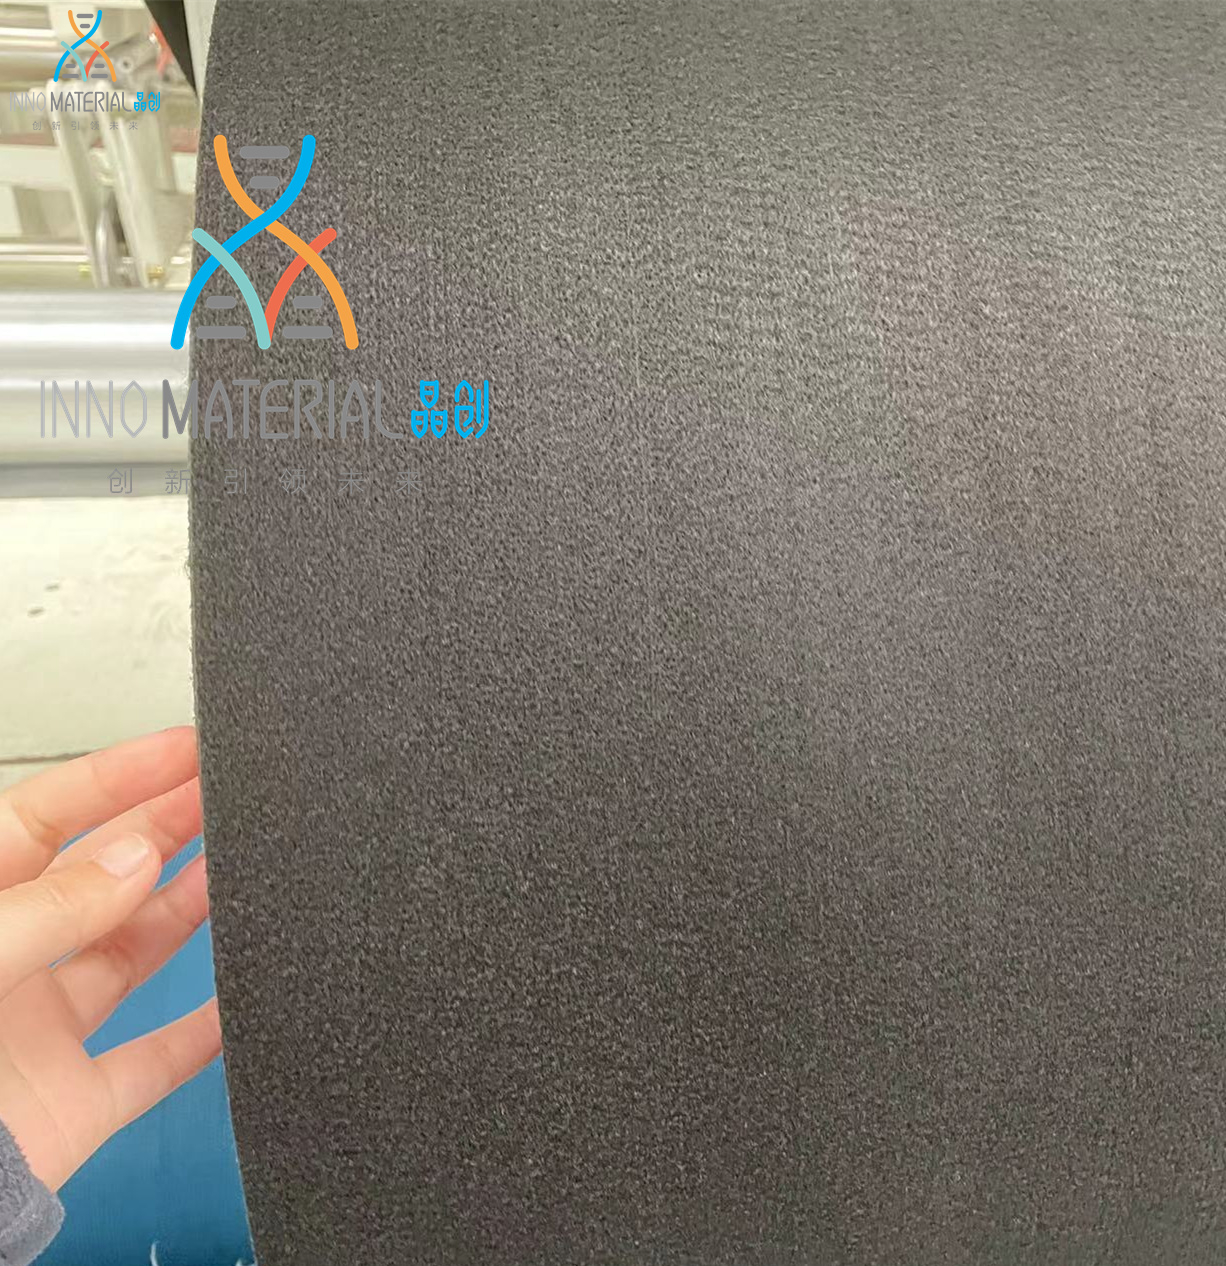 Non Woven Polypropylene Filament Geotextile for Highway